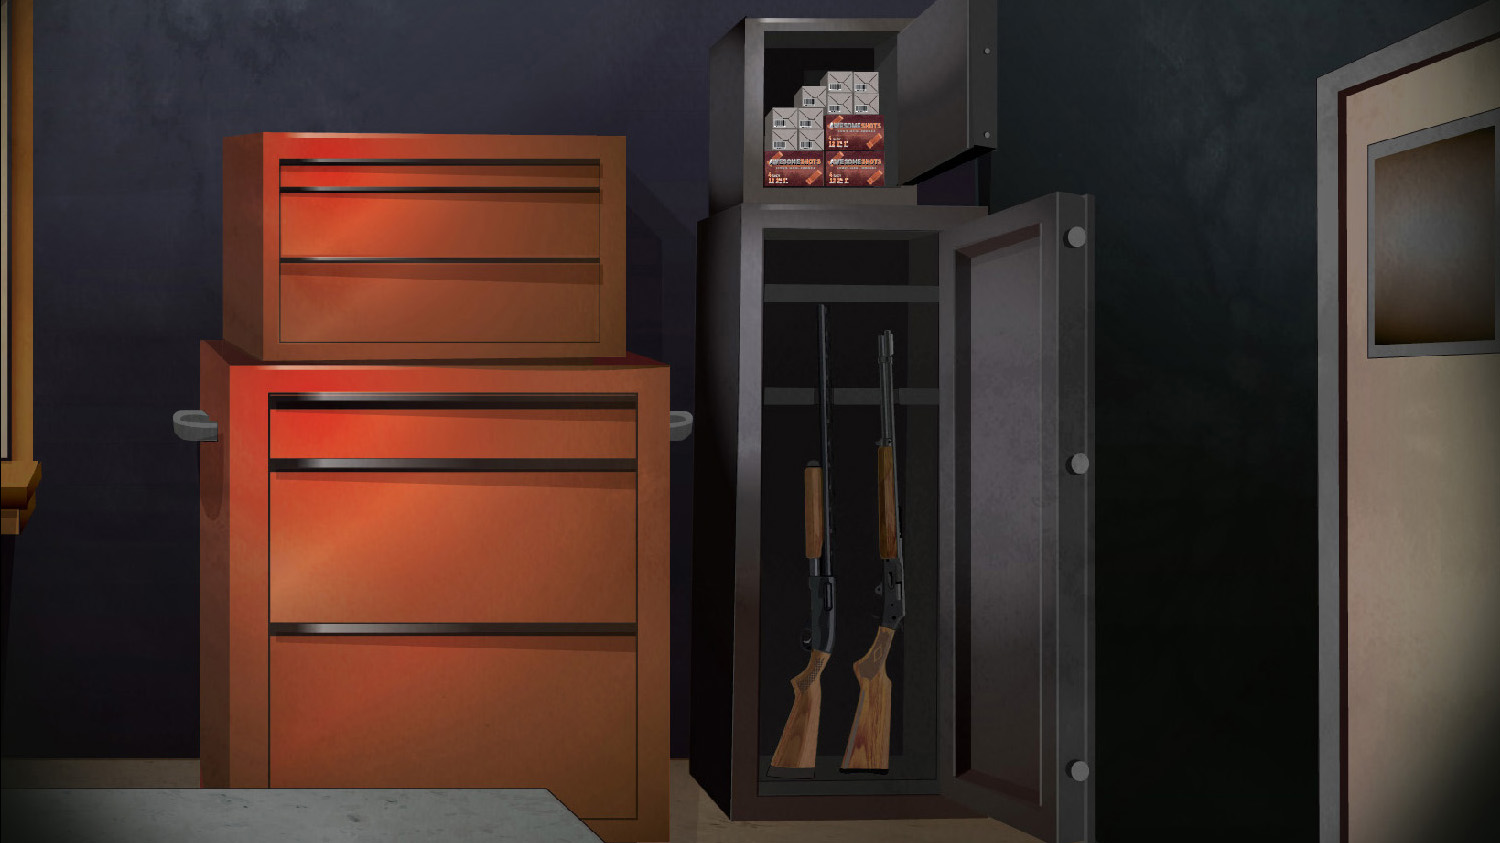 Illustration of firearms and ammunition stored in their own safes in a garage.